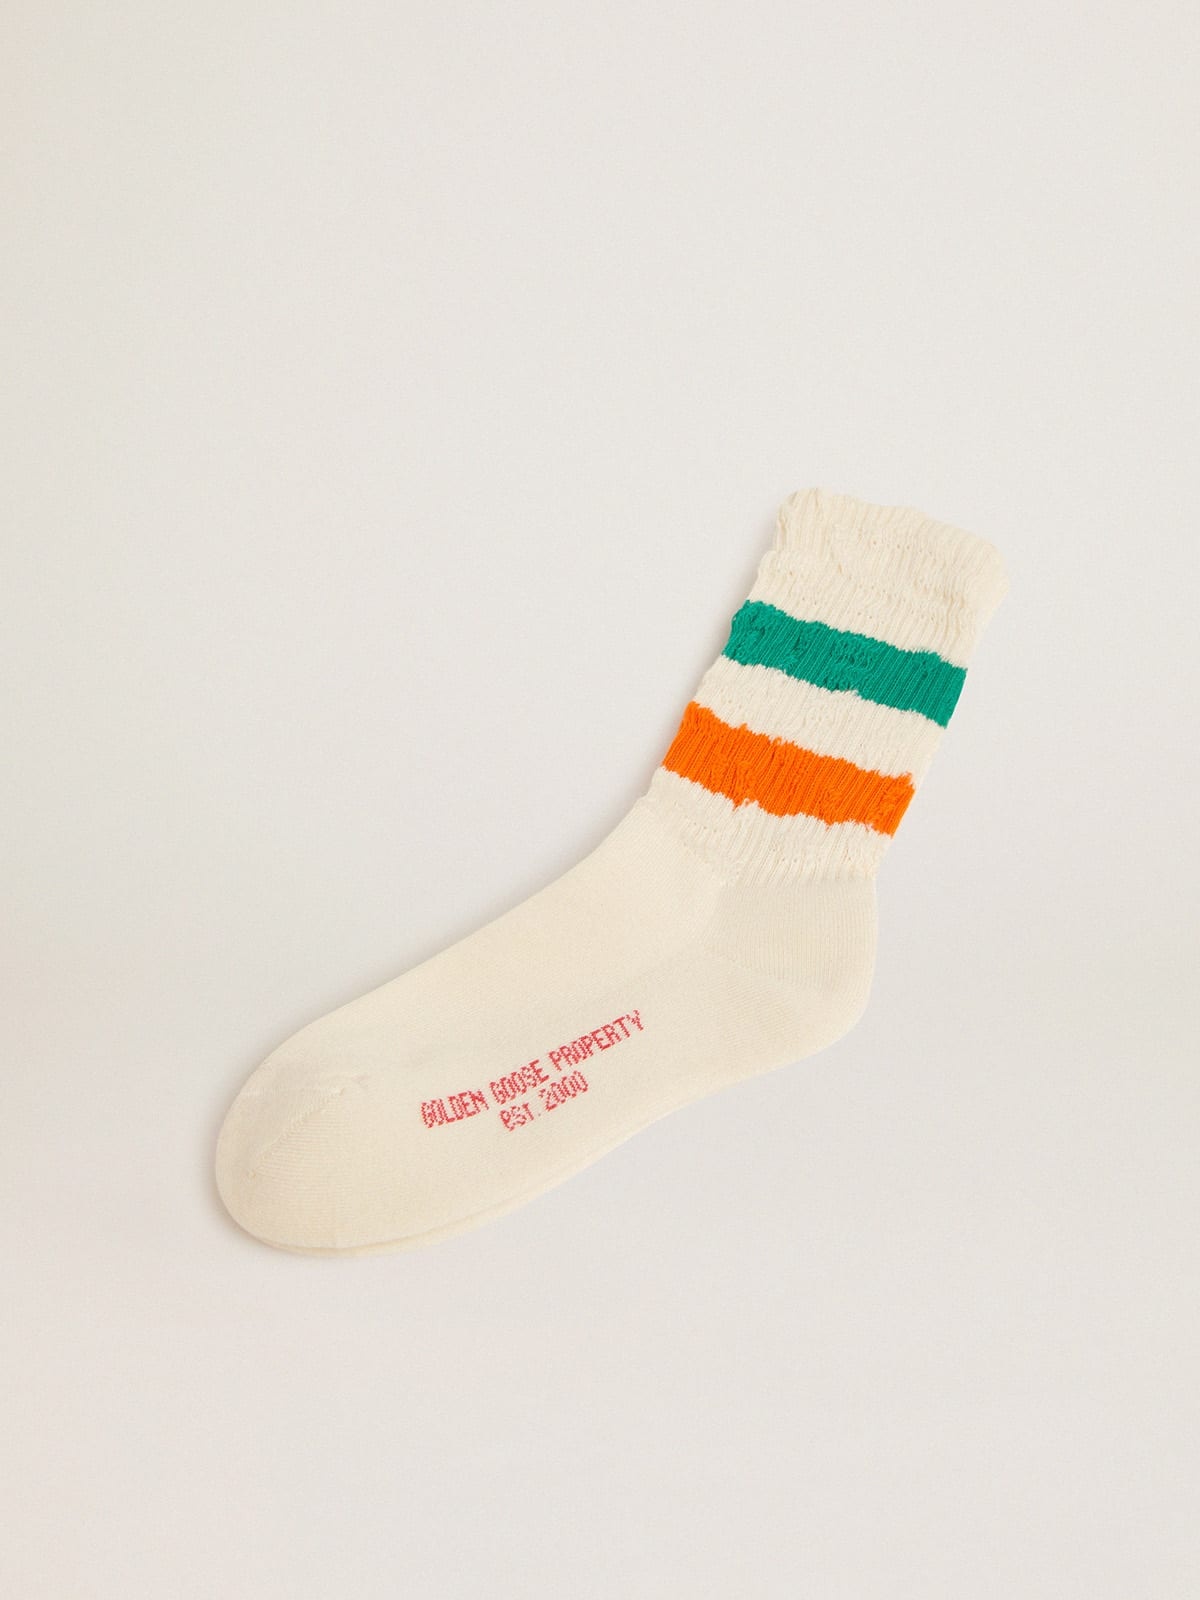 Distressed-finish white socks with green and orange stripes - 1